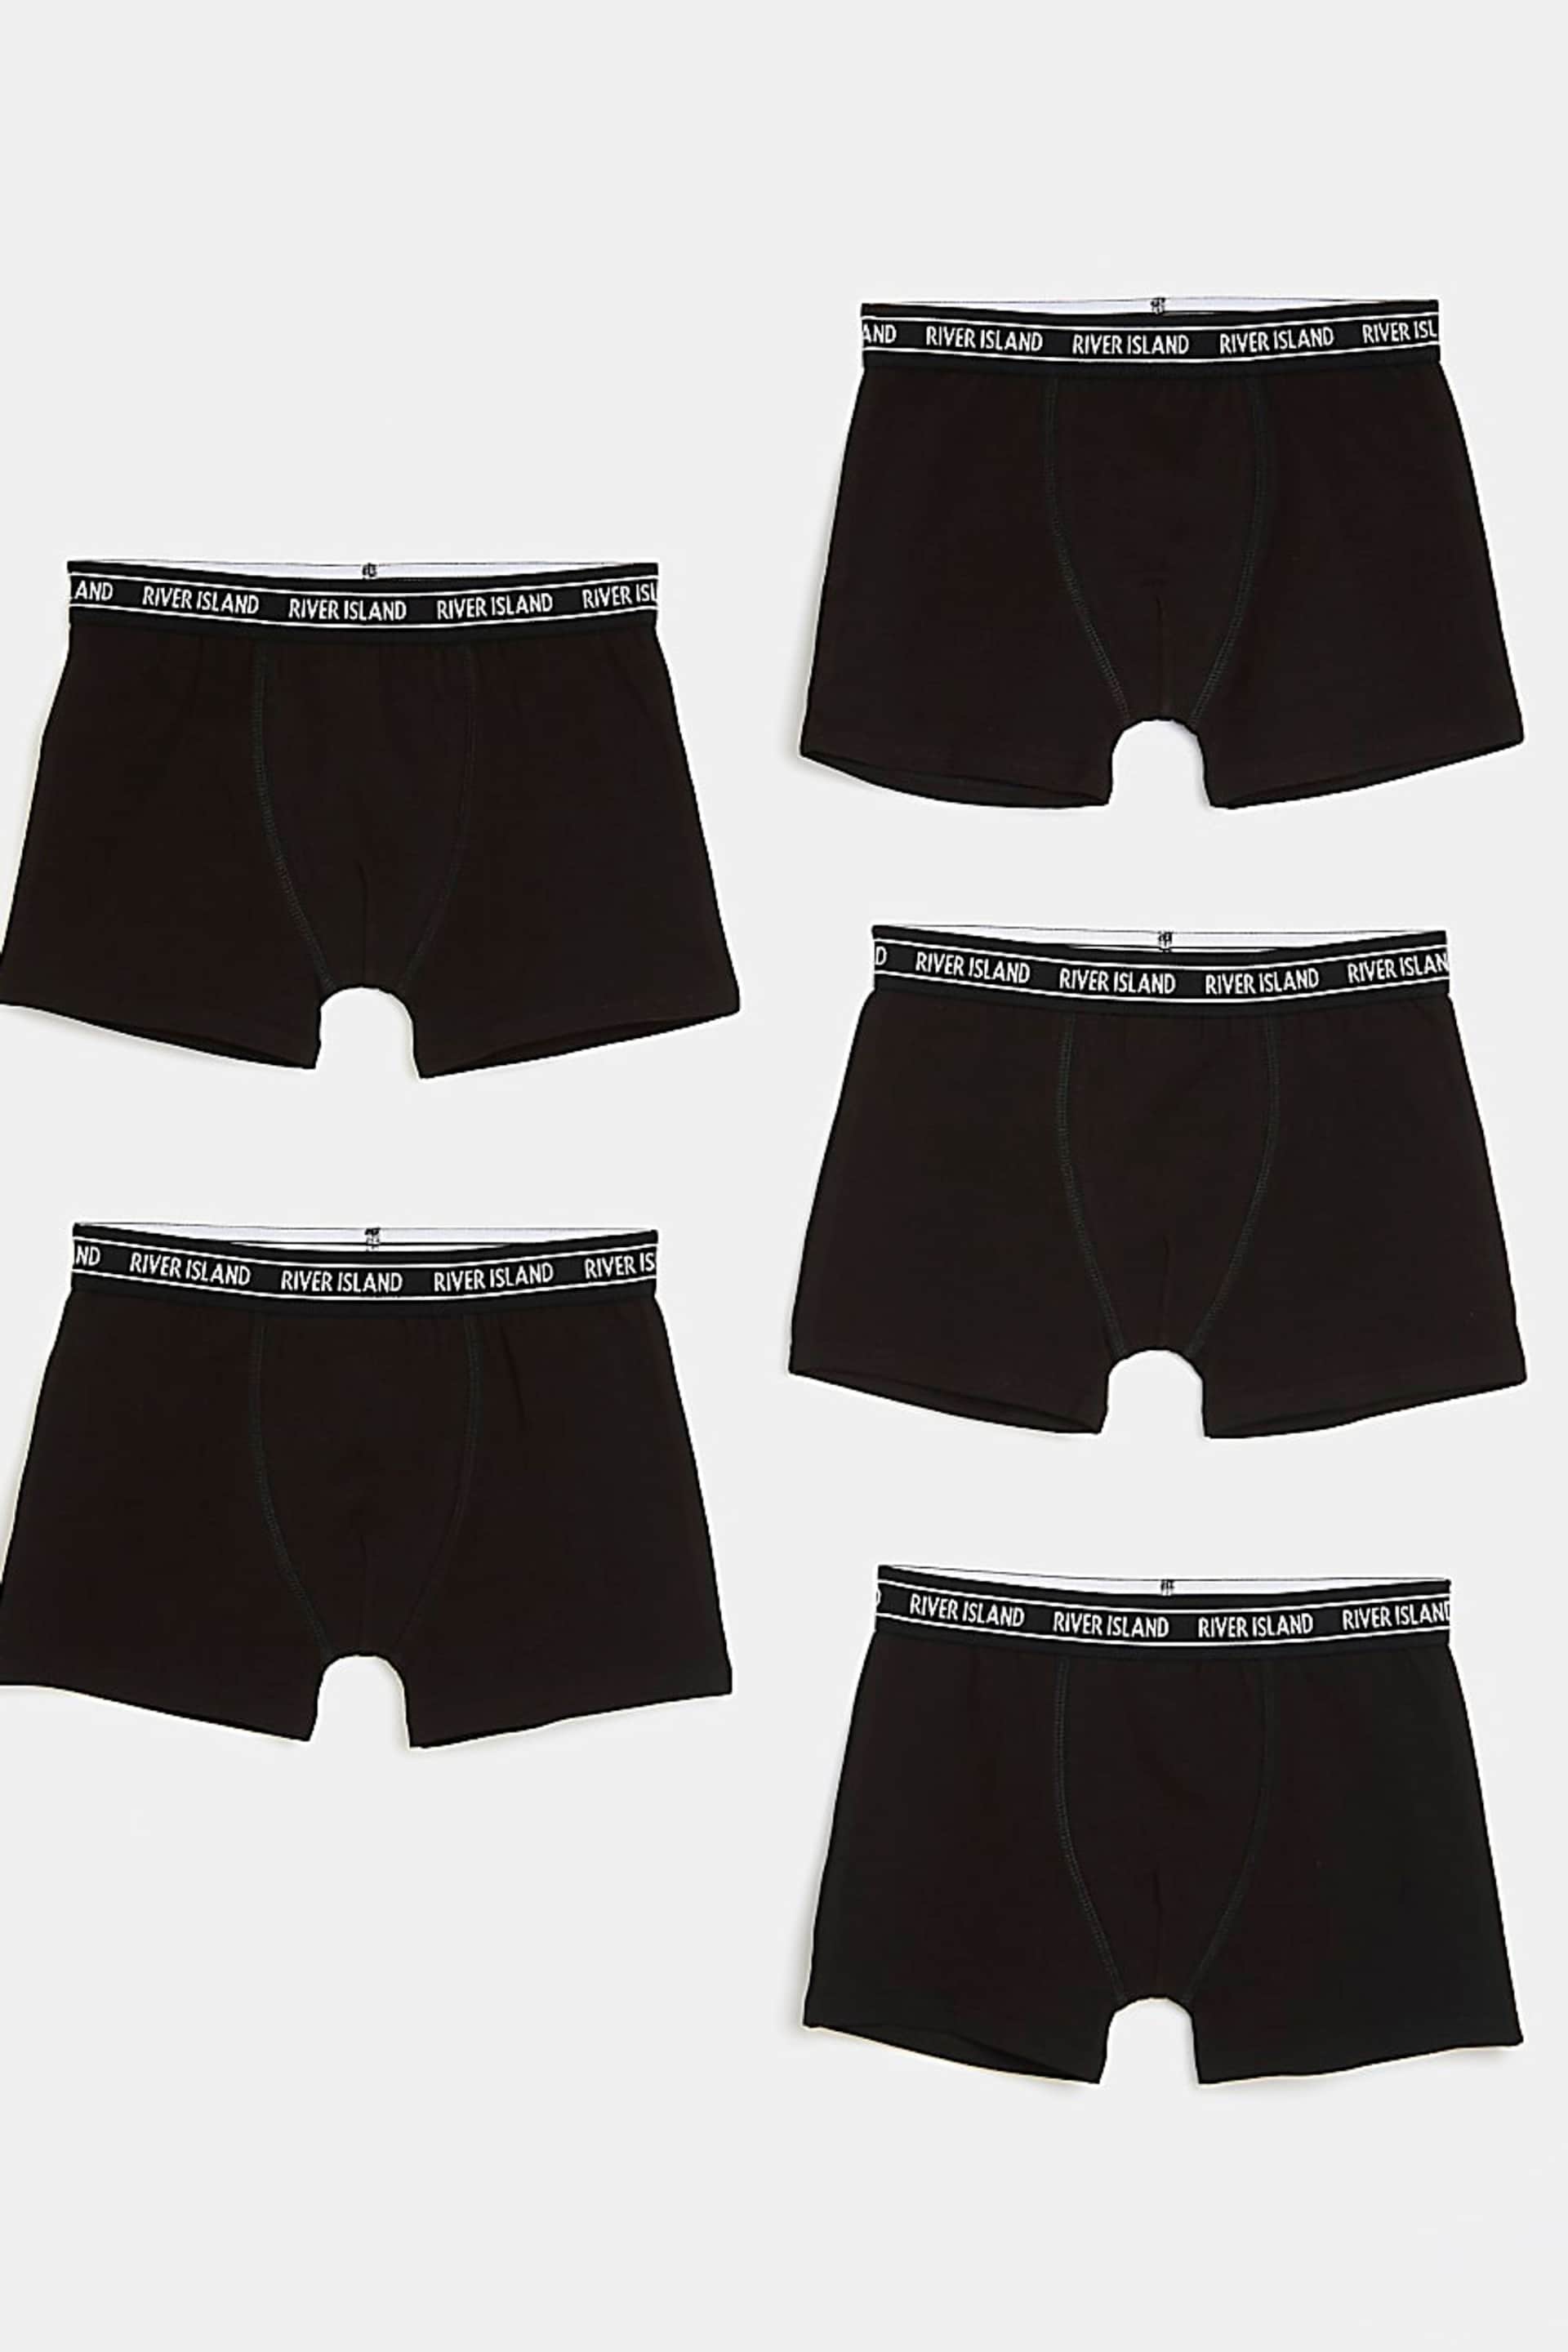 River Island Black Boys Boxers 5 Pack - Image 1 of 3